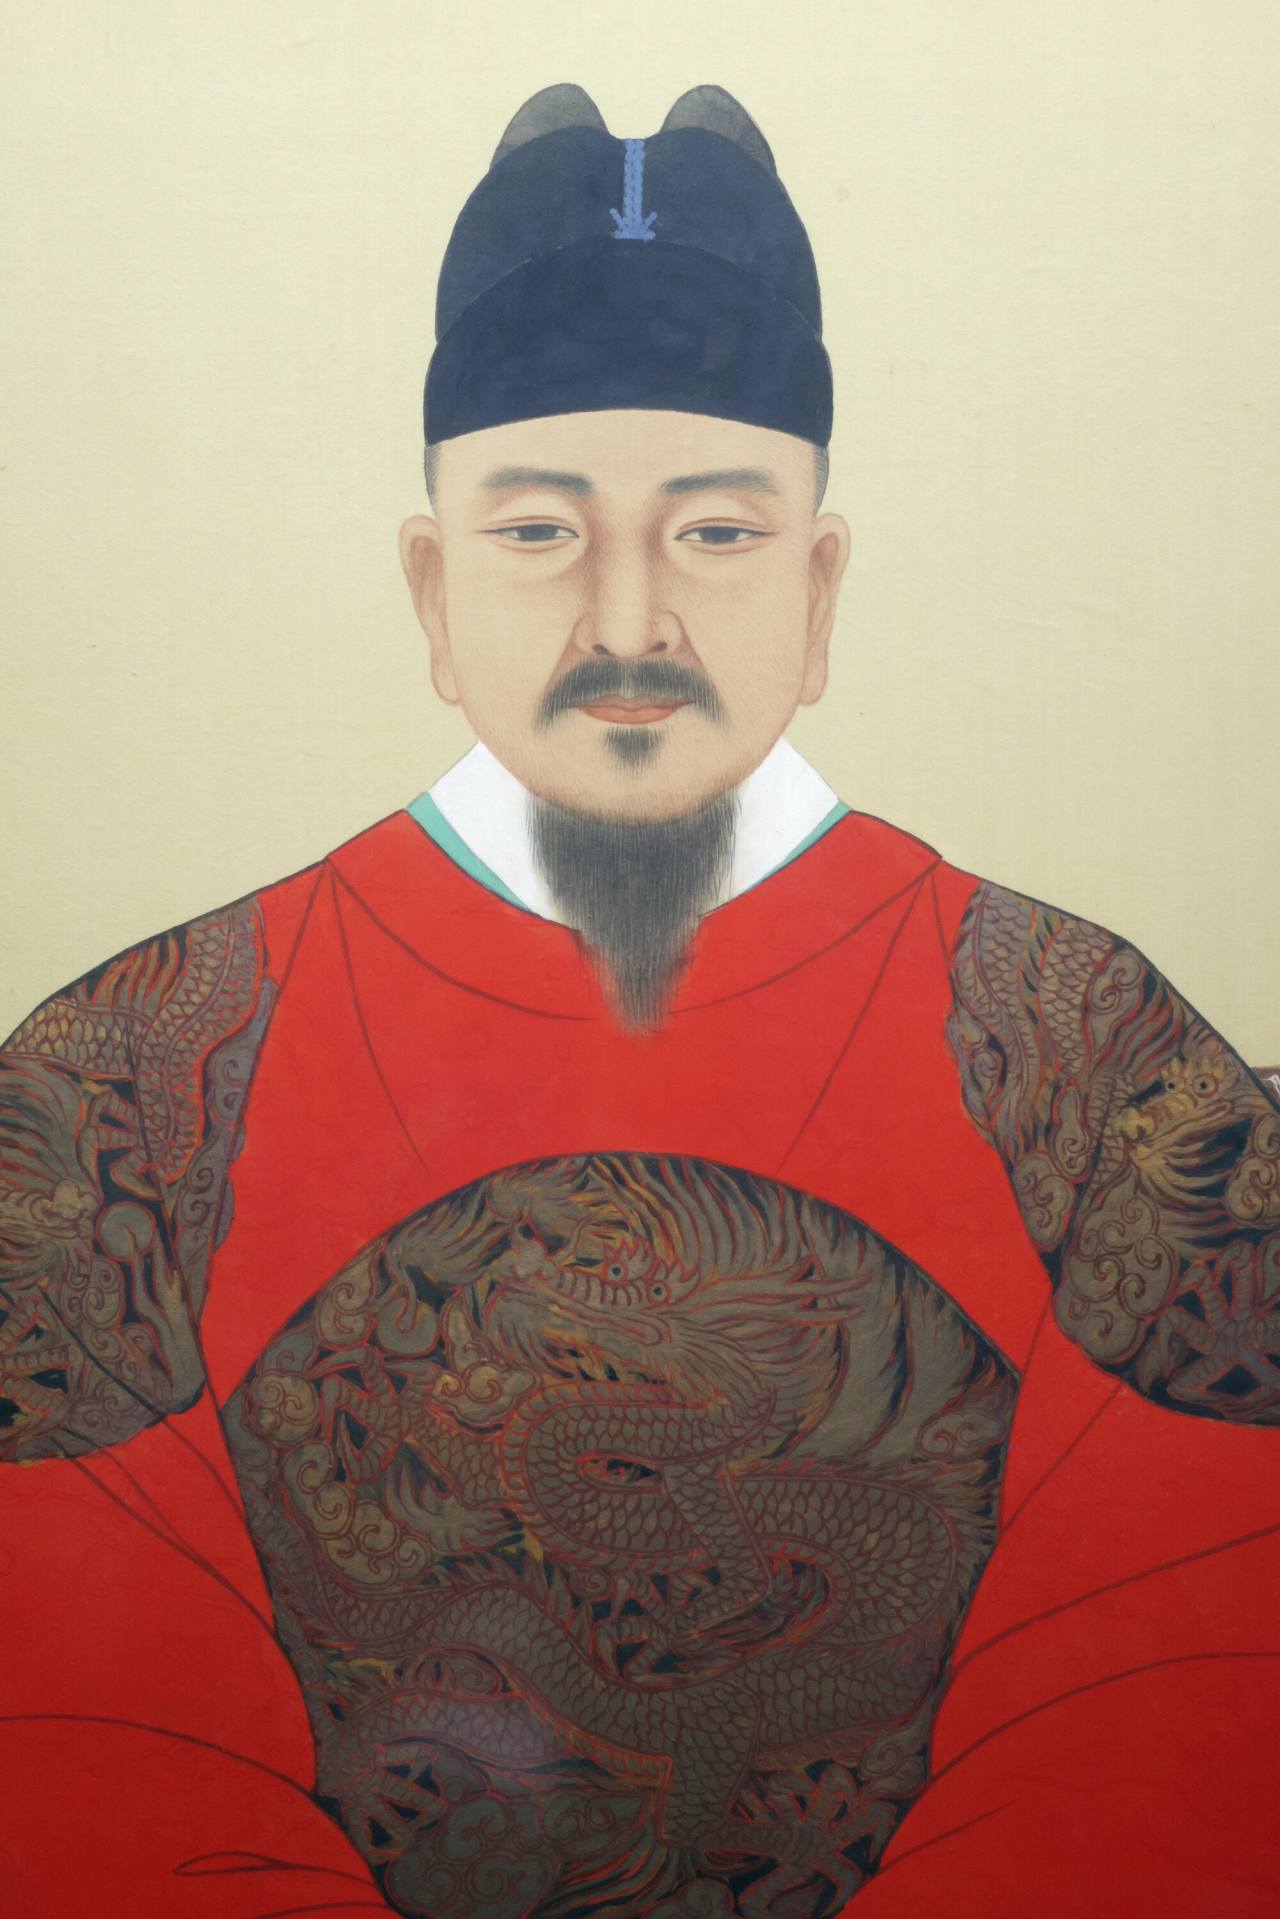 A picture of King Sejong the Great, who invented the Hangeul alphabet, is on display at the Royal Portrait Gallery in Jeonju, Korea. Photo © 2021 Hyungwon Kang